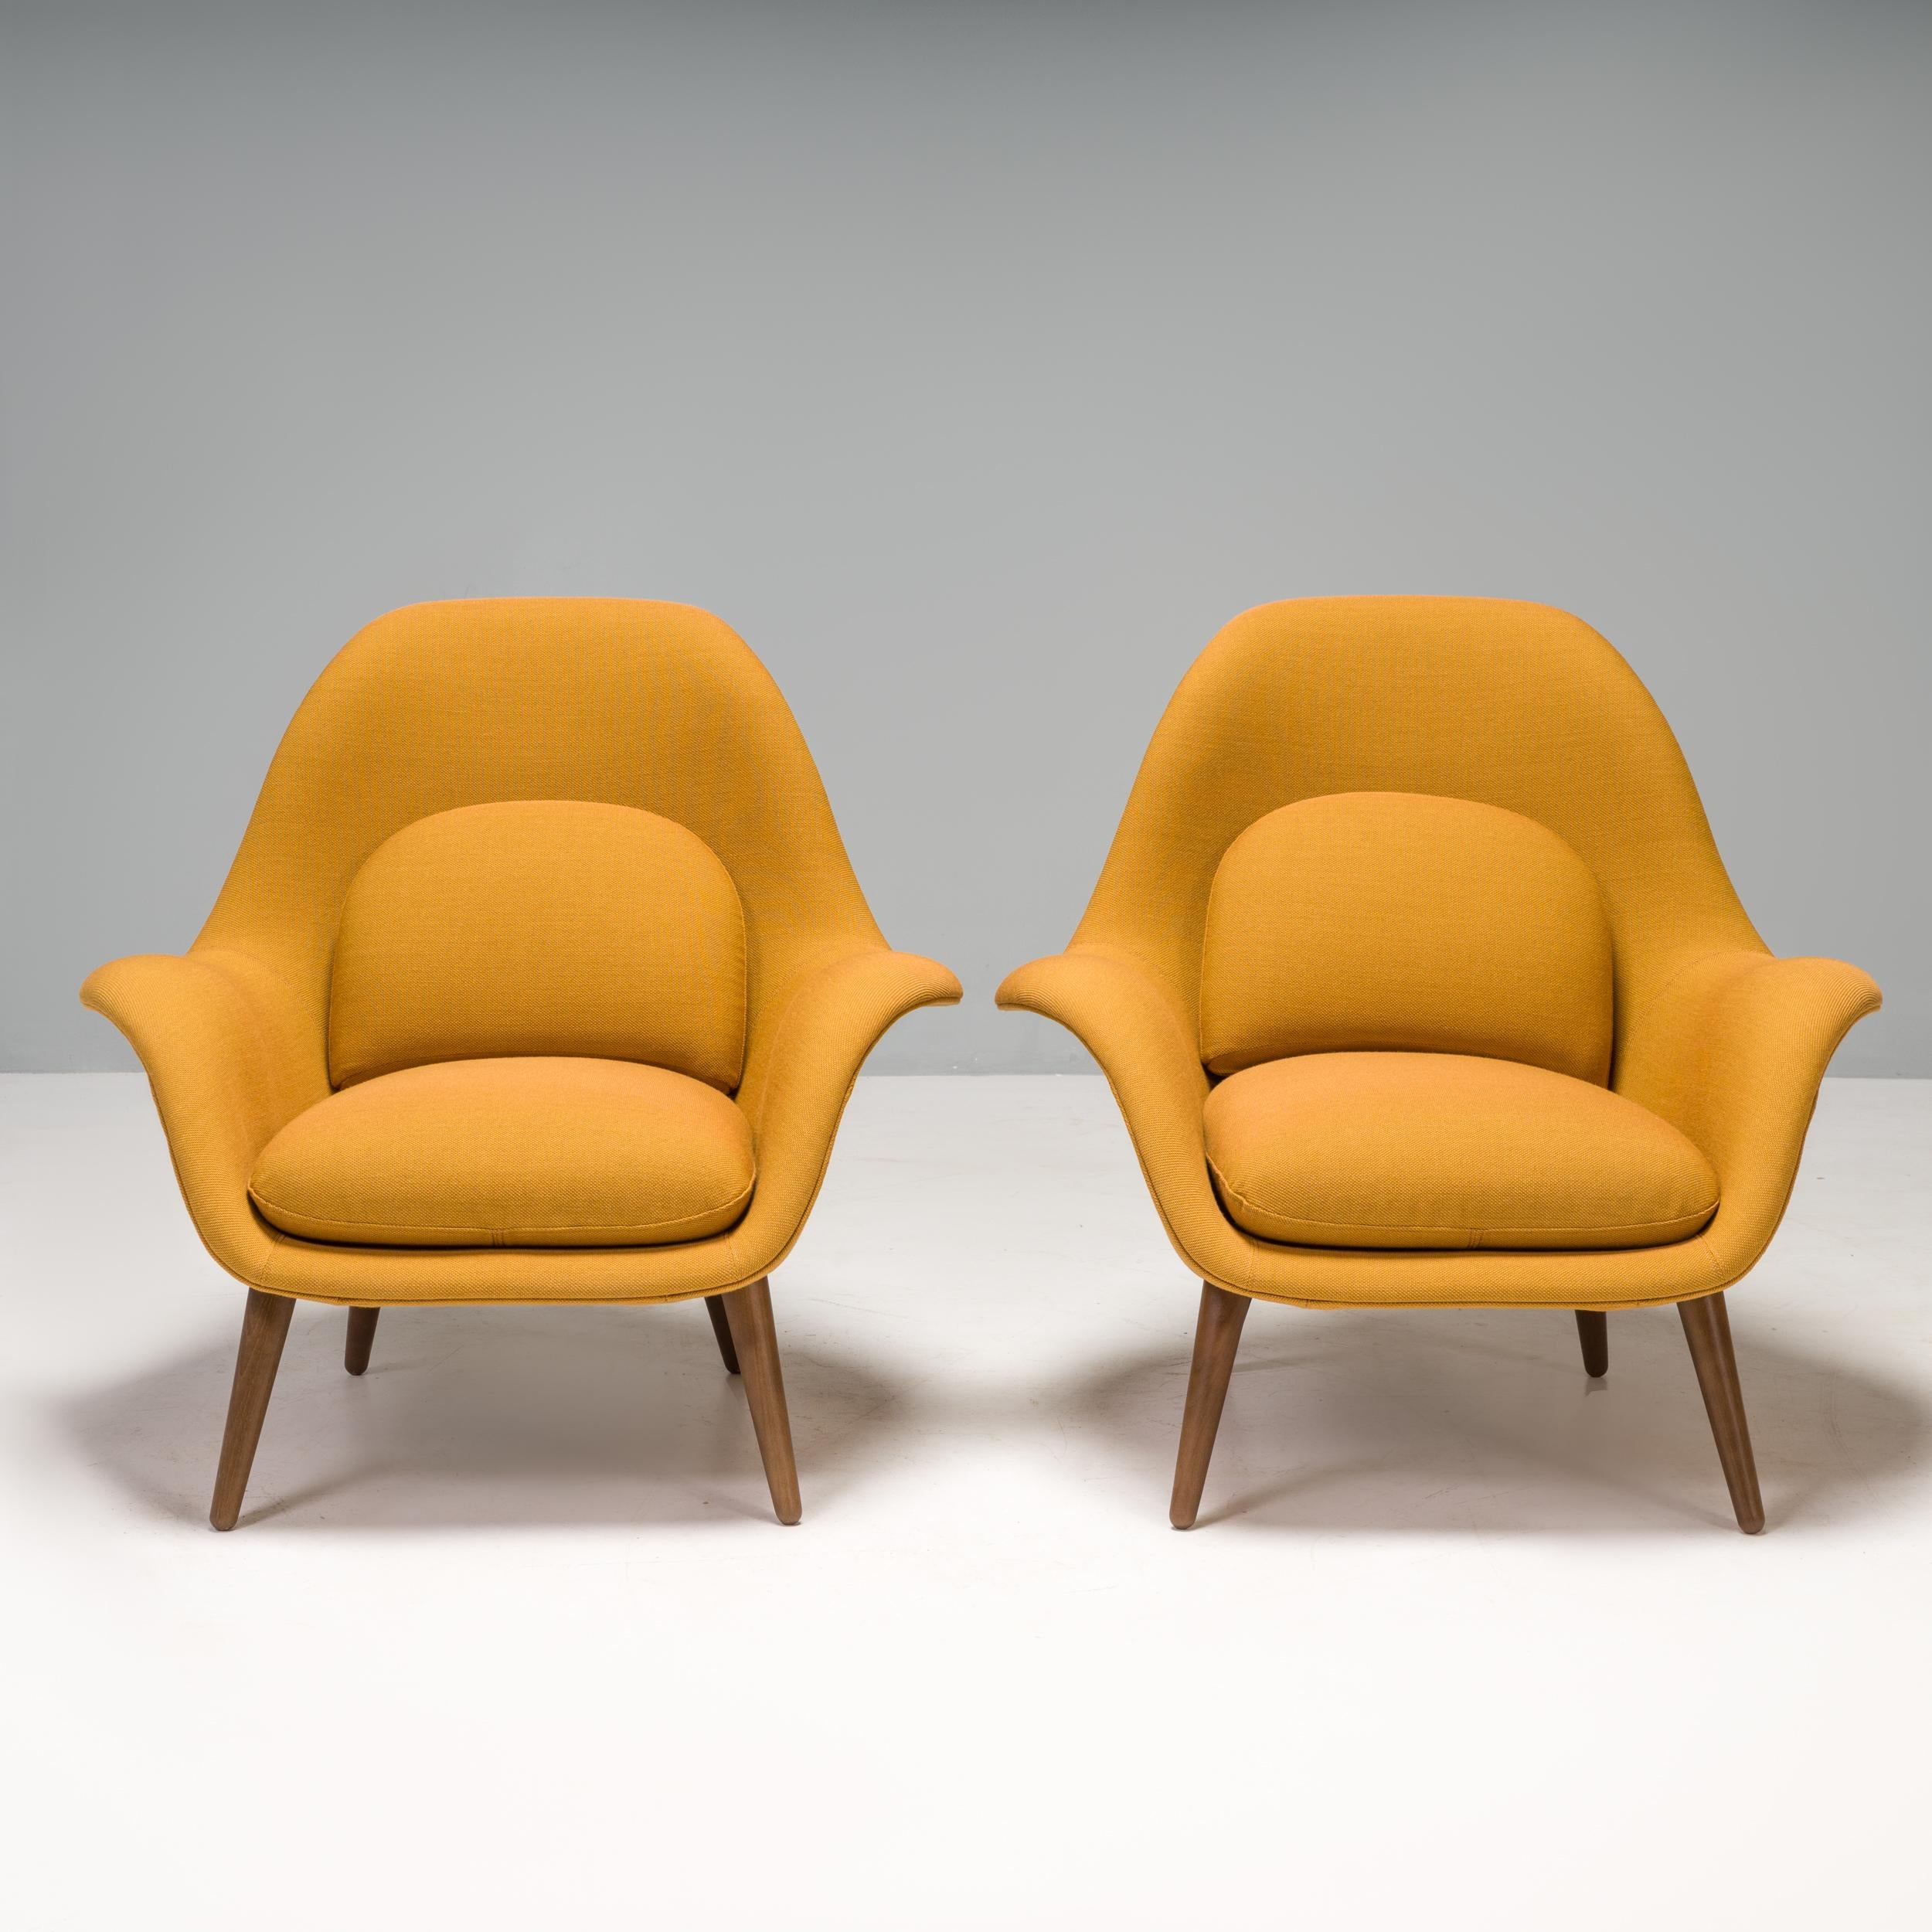 Designed by Space Copenhagen for Danish furniture manufacturer Fredericia, this pair of Swoon armchairs was made in 2021.

Featuring a lacquered walnut frame, the chairs have a sculptural silhouette with a high curved back, giving a contemporary